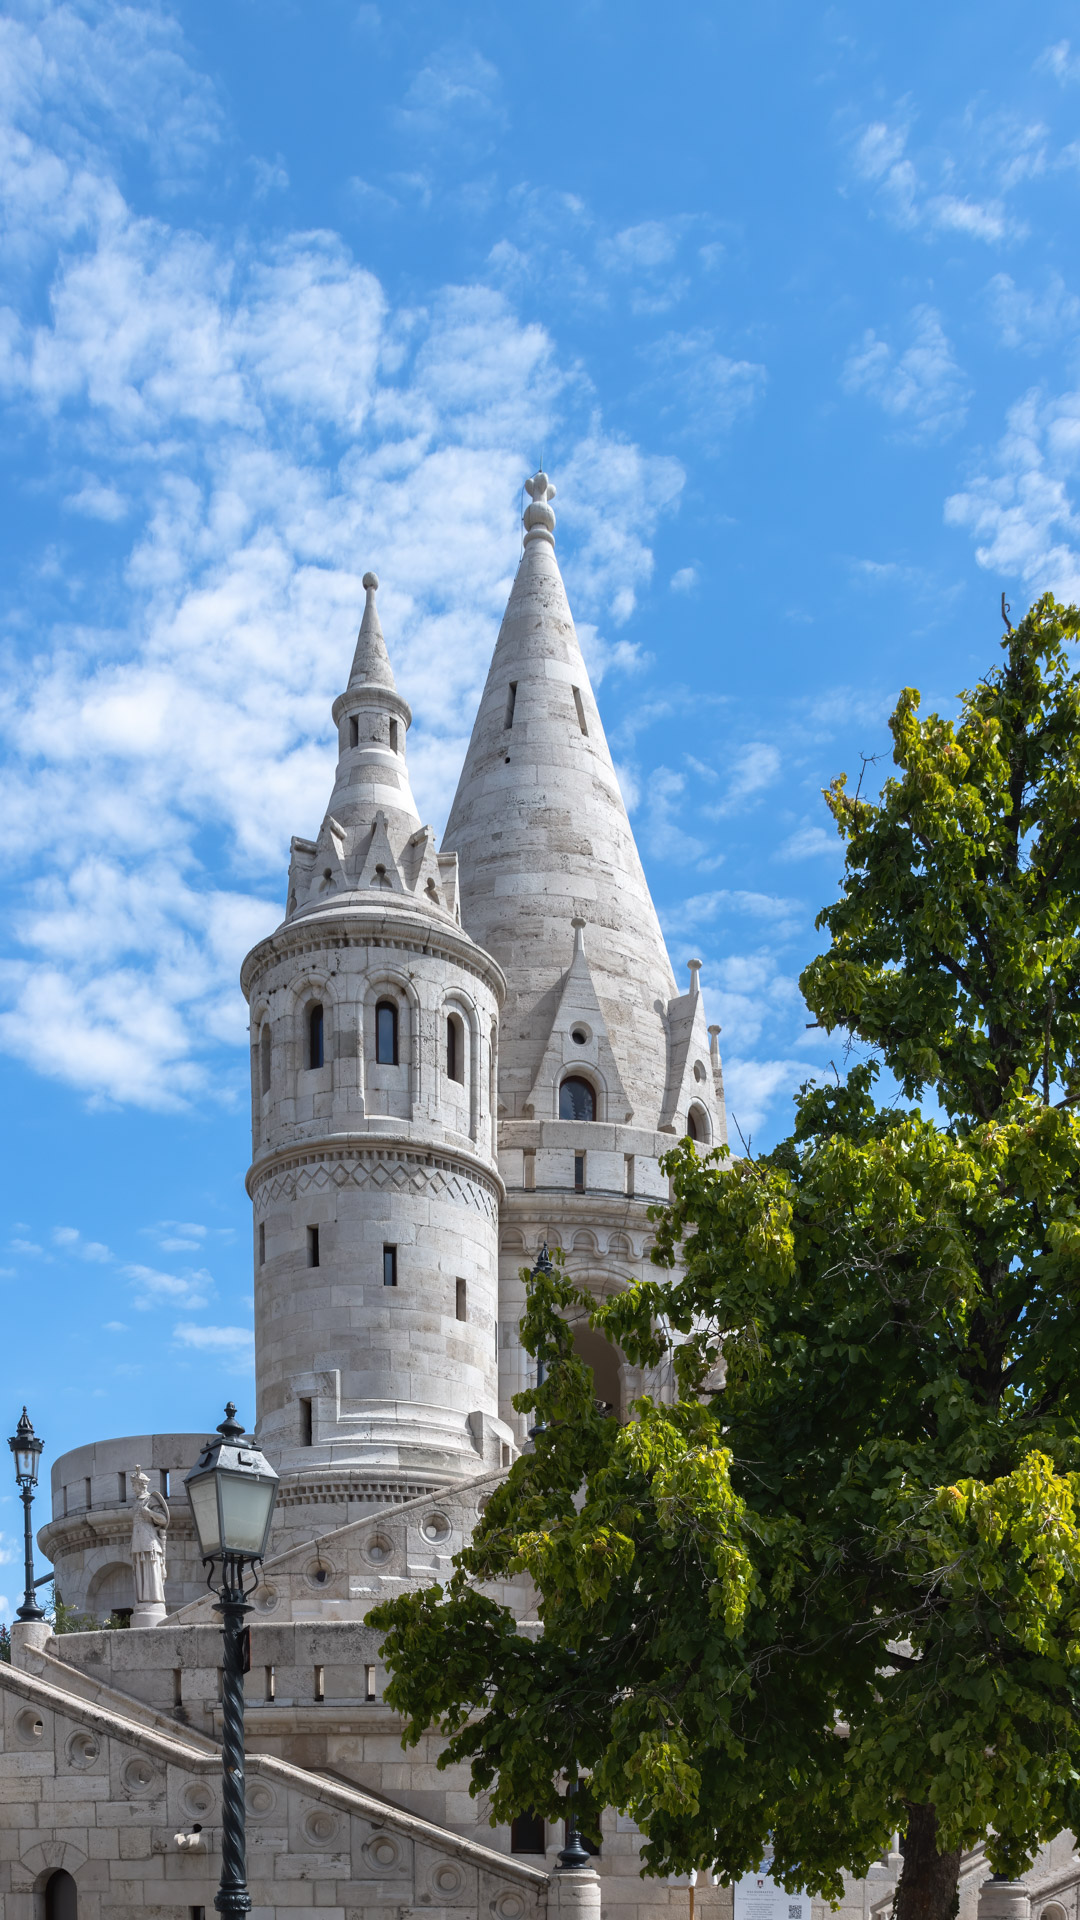 Experience the enchanting beauty of Budapest with our free wallpaper featuring the stunning Fisherman's Bastion.